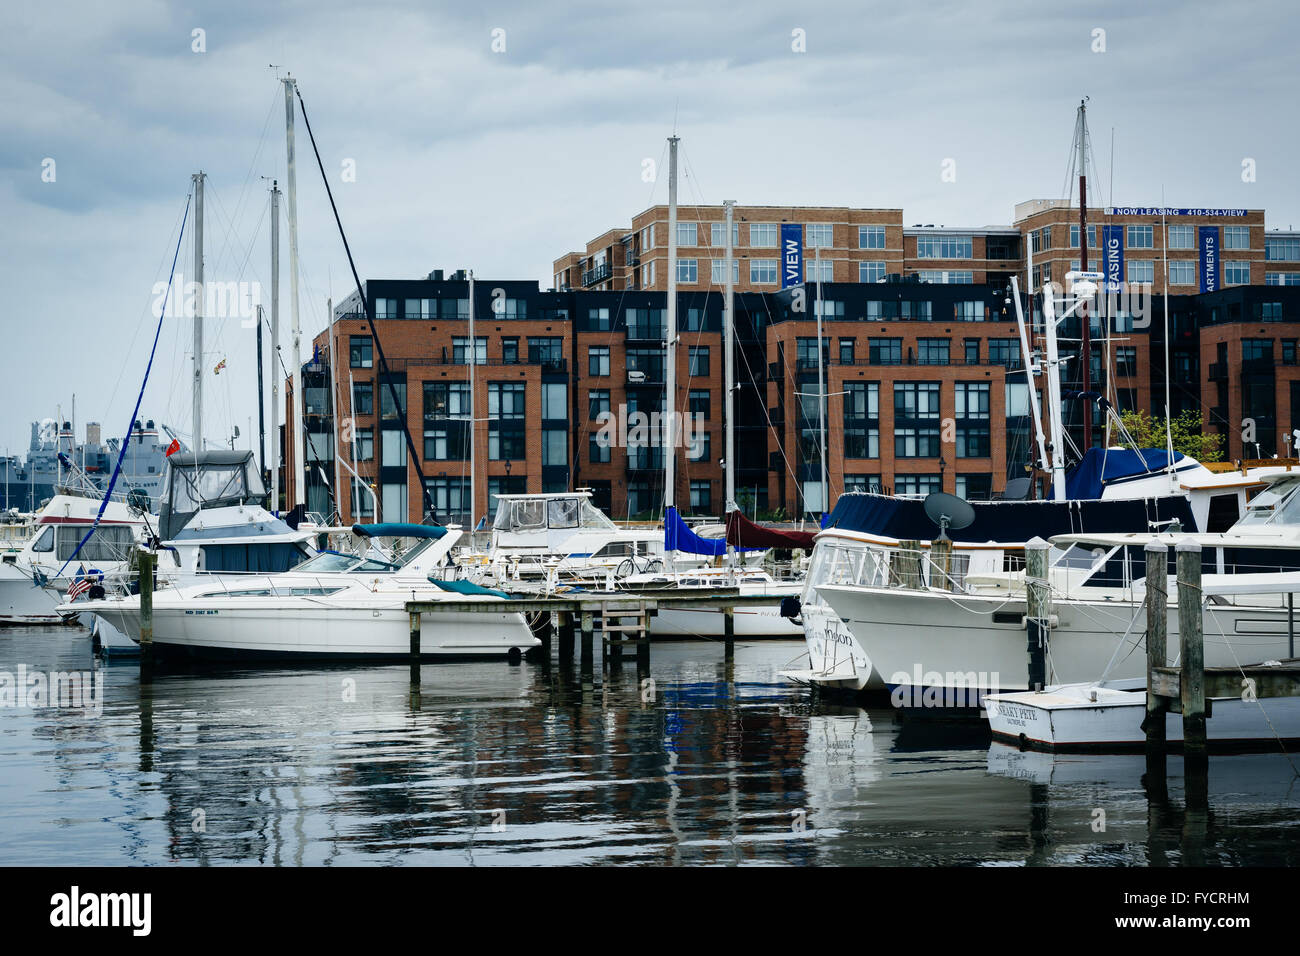 Boats and buildings on the waterfront in Fells Point, Baltimore, Maryland. Stock Photo